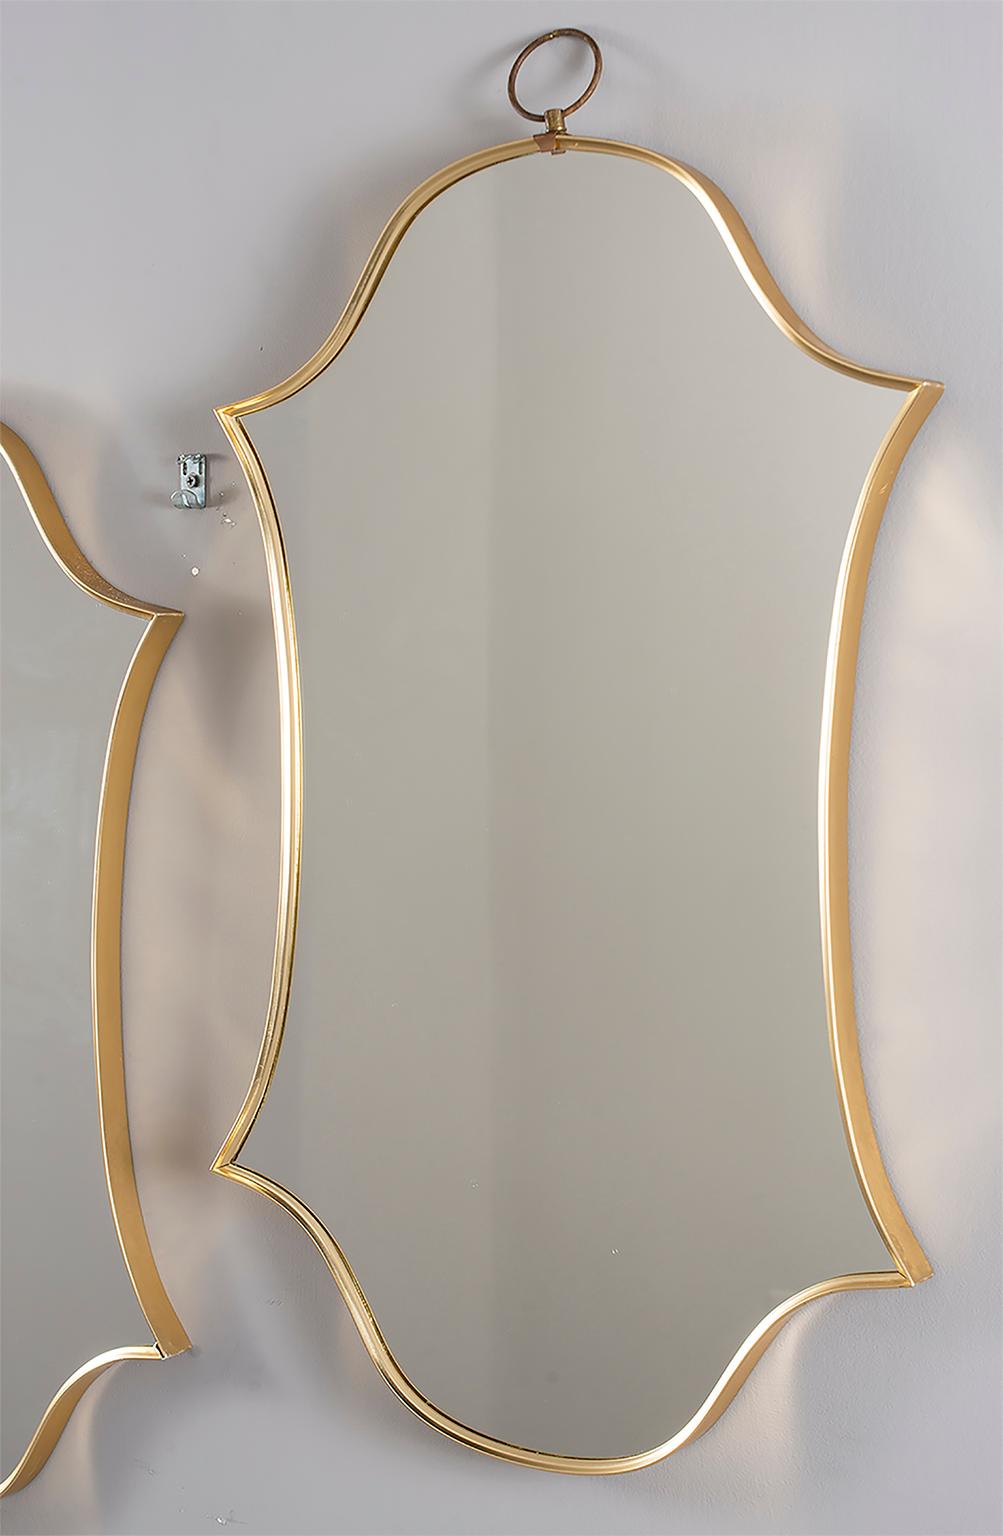 Pair of midcentury circa 1970s brass framed mirrors have an elongated double shield form shape with a brass hanging loop at the top. Sold and priced as a pair.
  